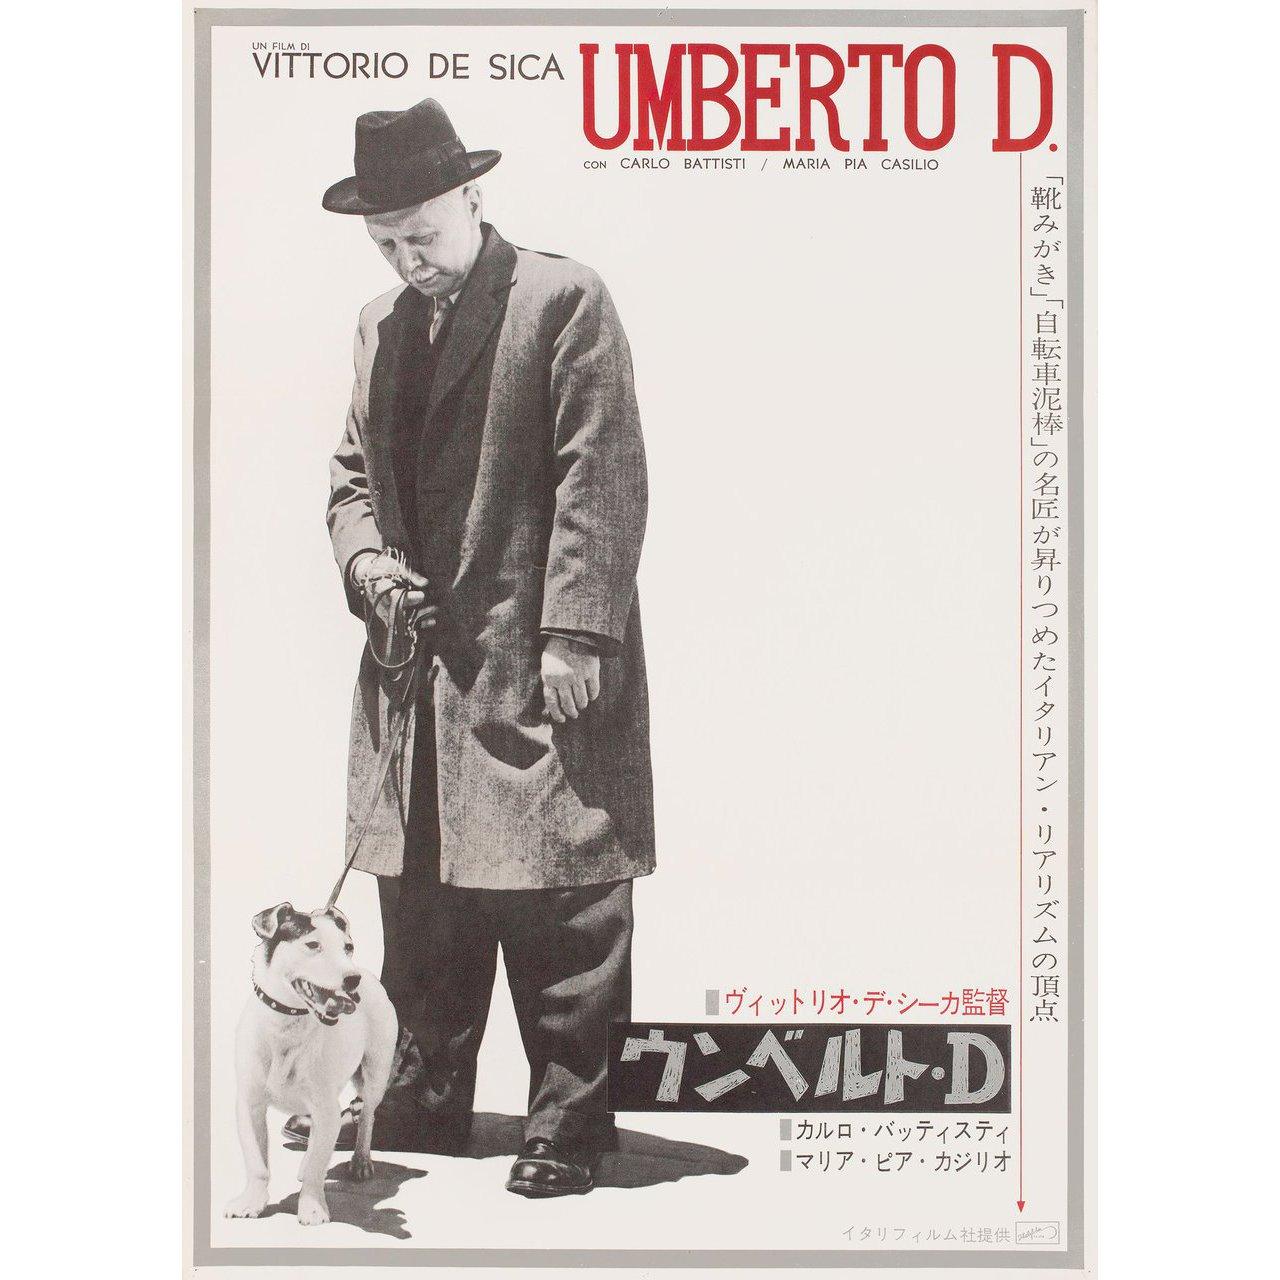 Original 1962 Japanese B2 poster for the first Japanese theatrical release of the 1952 film Umberto D. directed by Vittorio De Sica with Carlo Battisti / Maria Pia Casilio / Lina Gennari / Ileana Simova. Very Good-Fine condition, rolled. Please